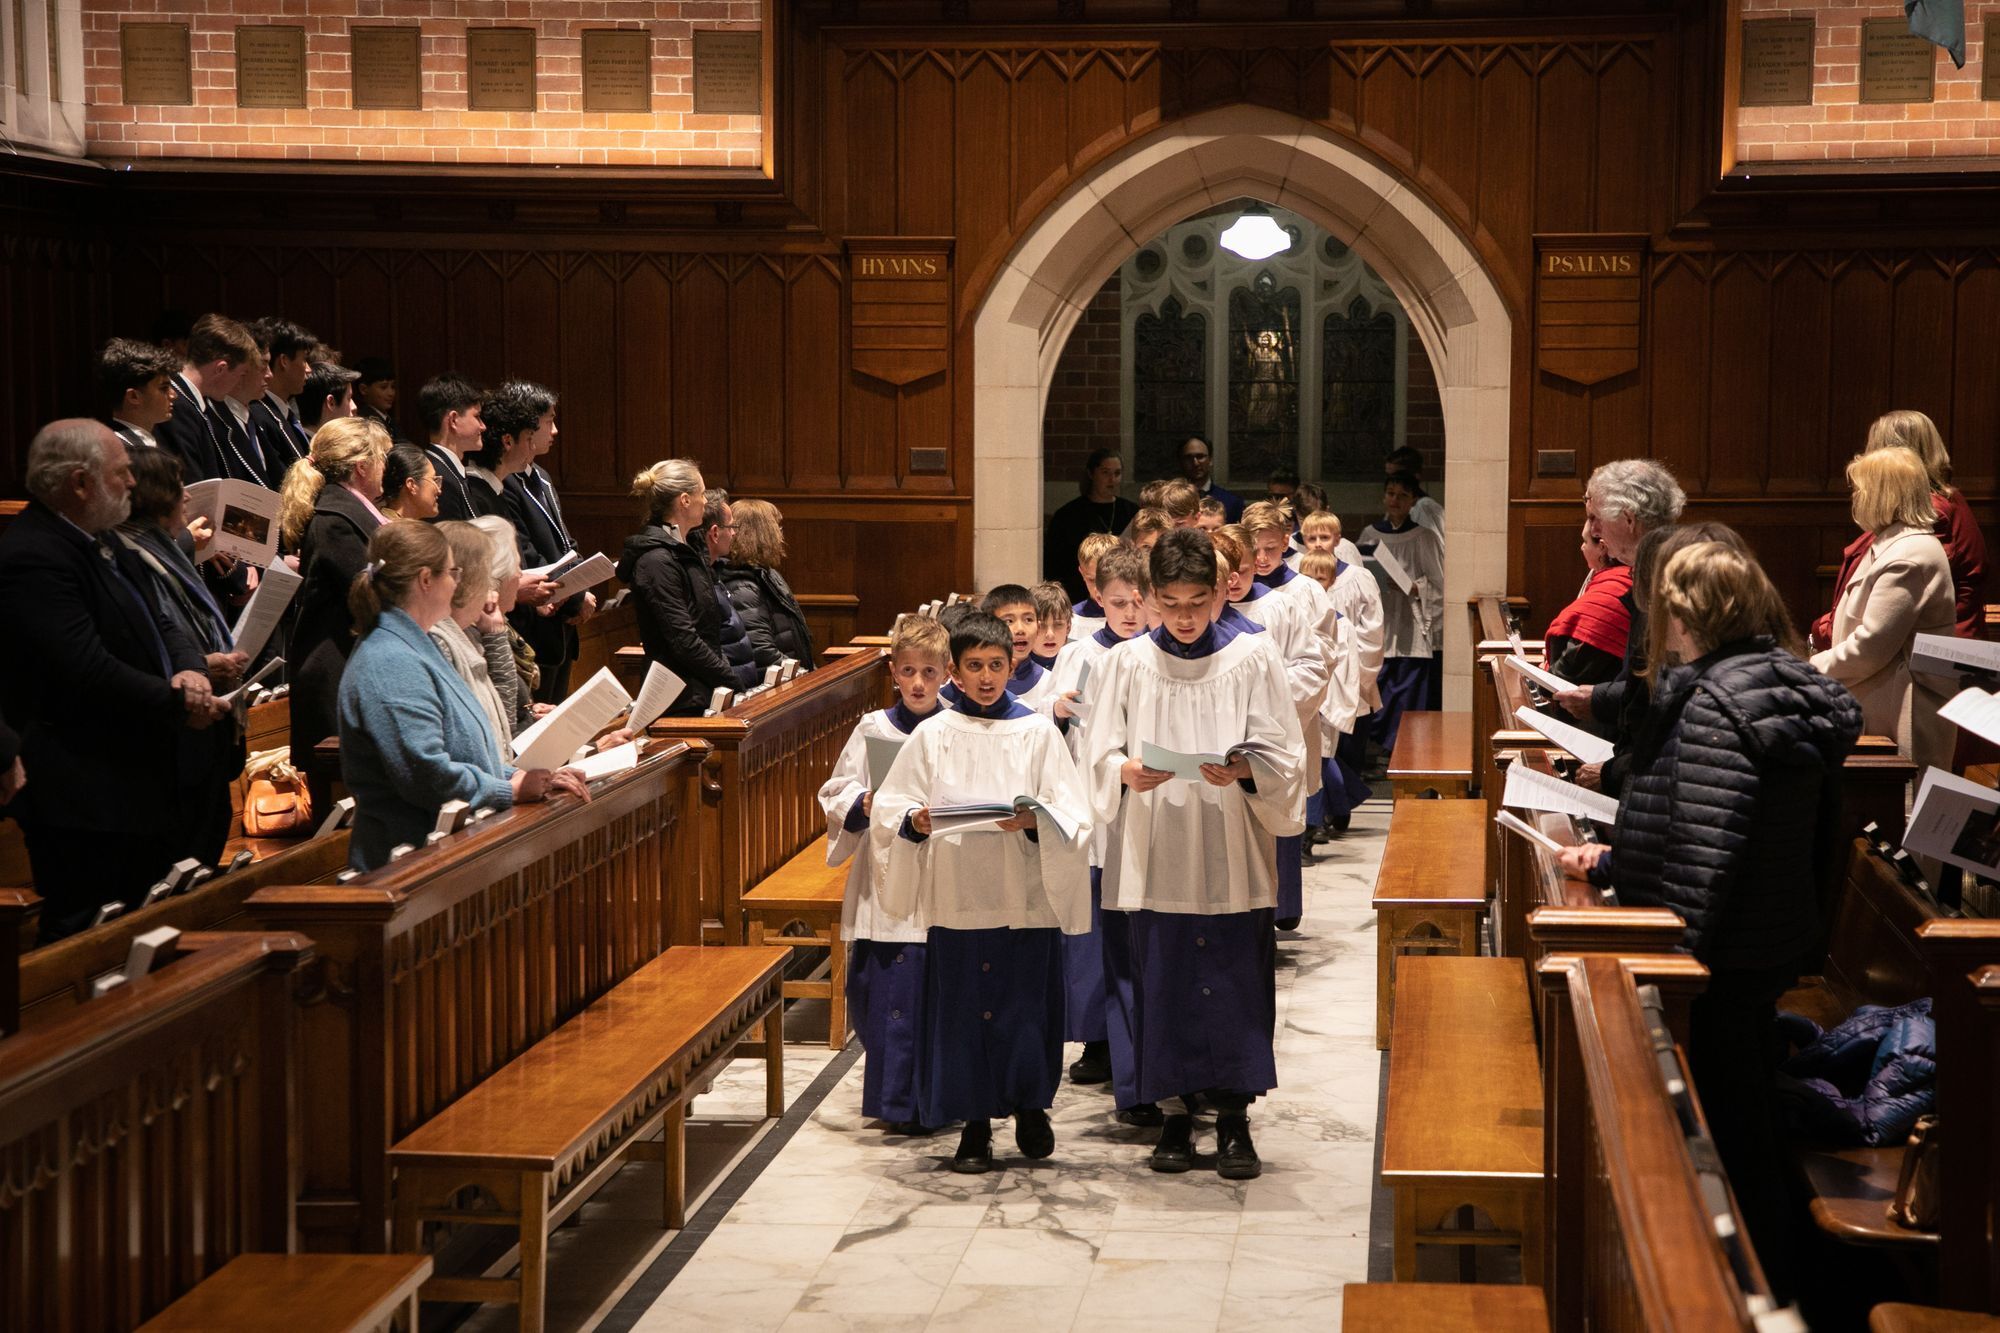 Choral Evensong Service